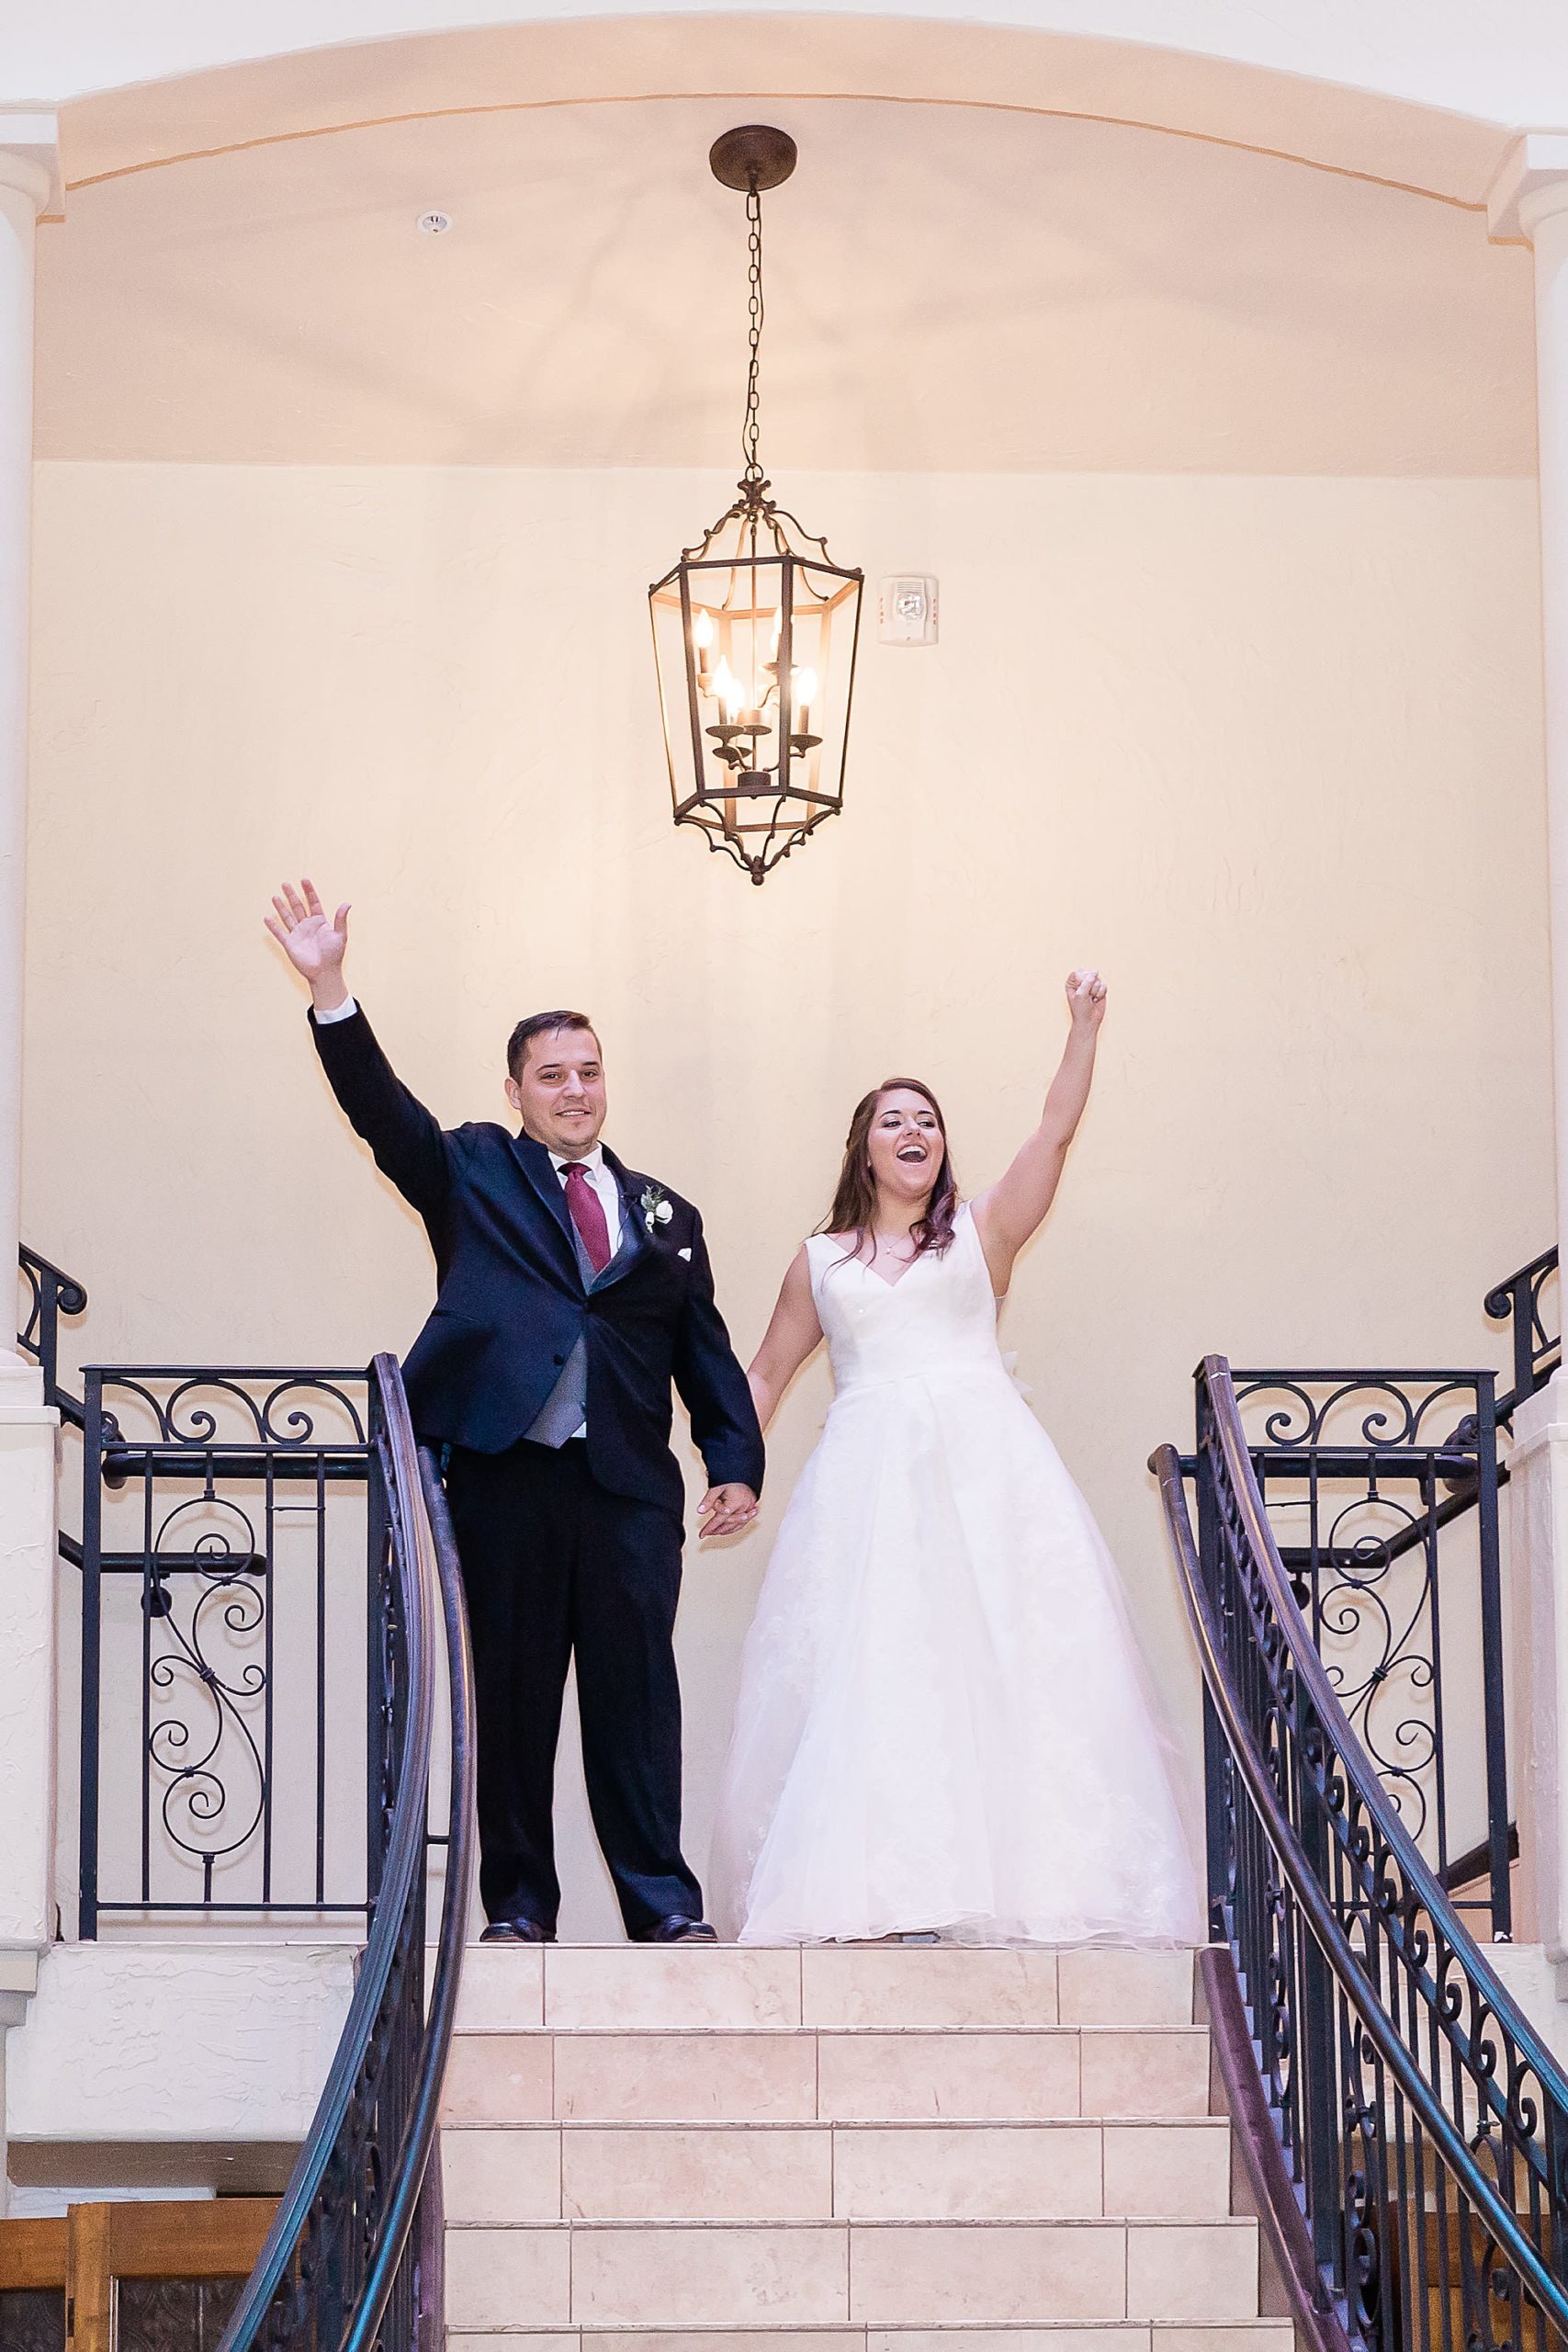 newlyweds cheer on top of staircase at Texas wedding reception